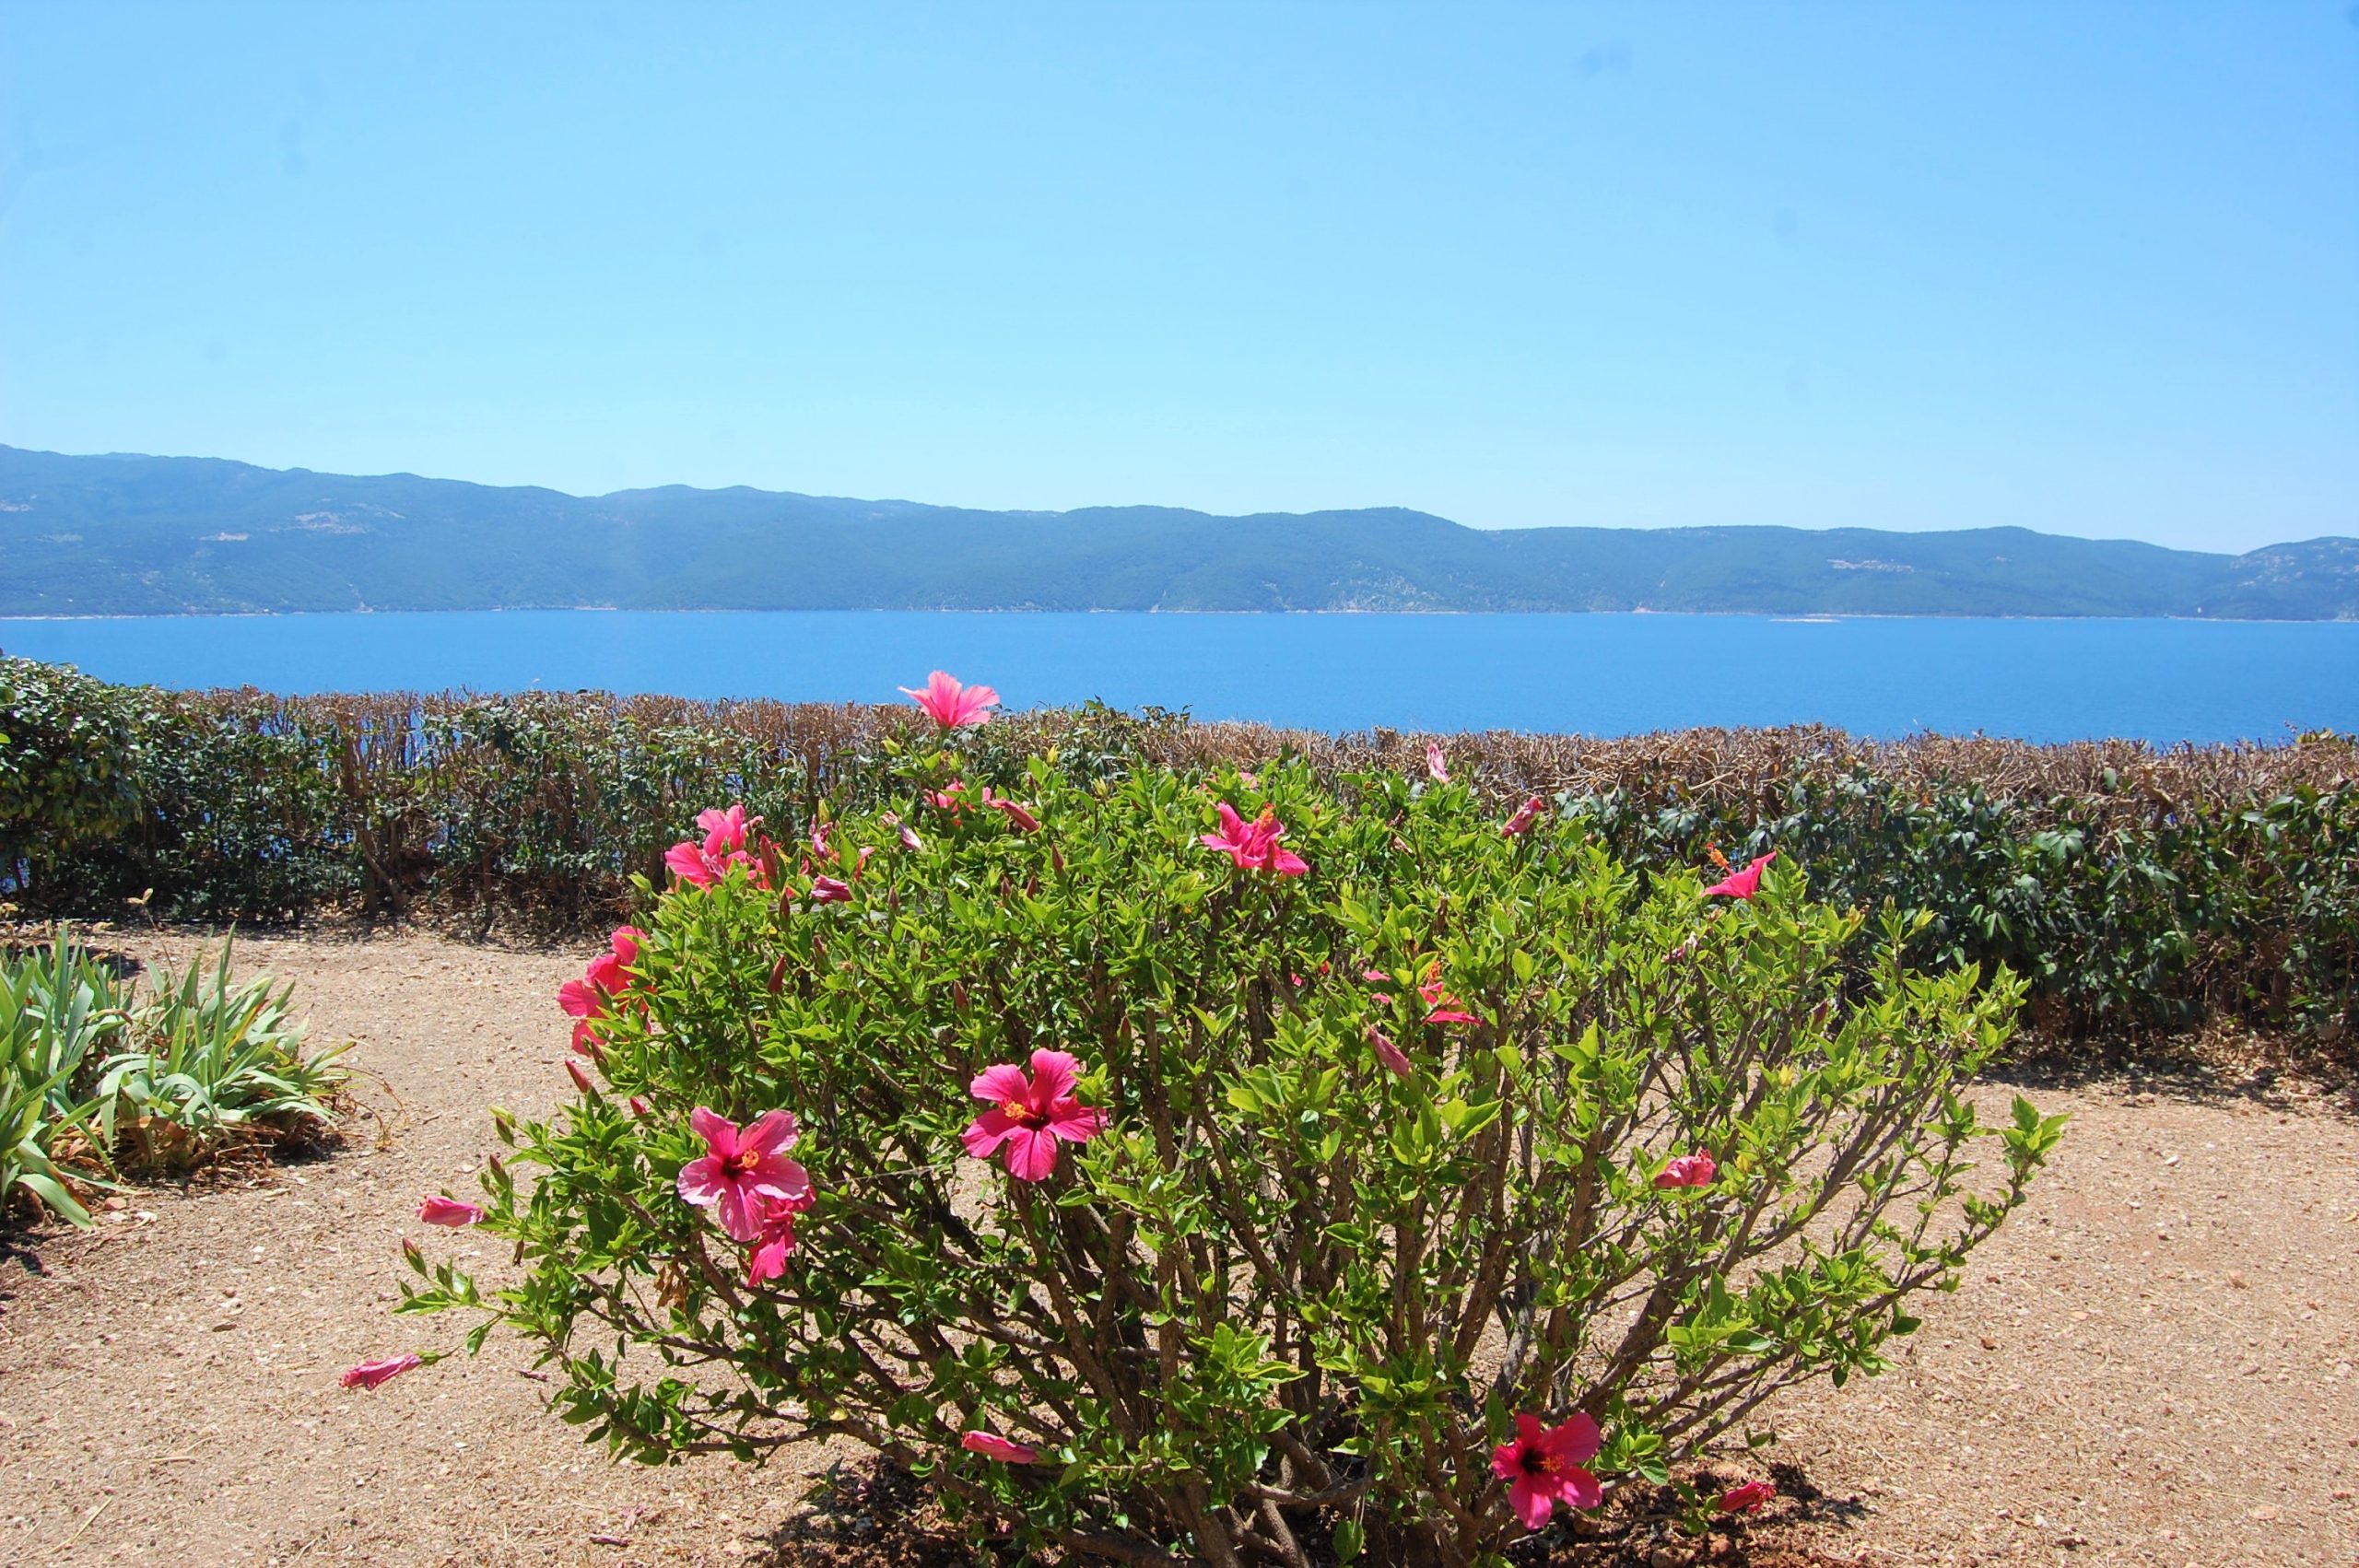 Outdoor area of property for sale on Ithaca Greece, Stavros